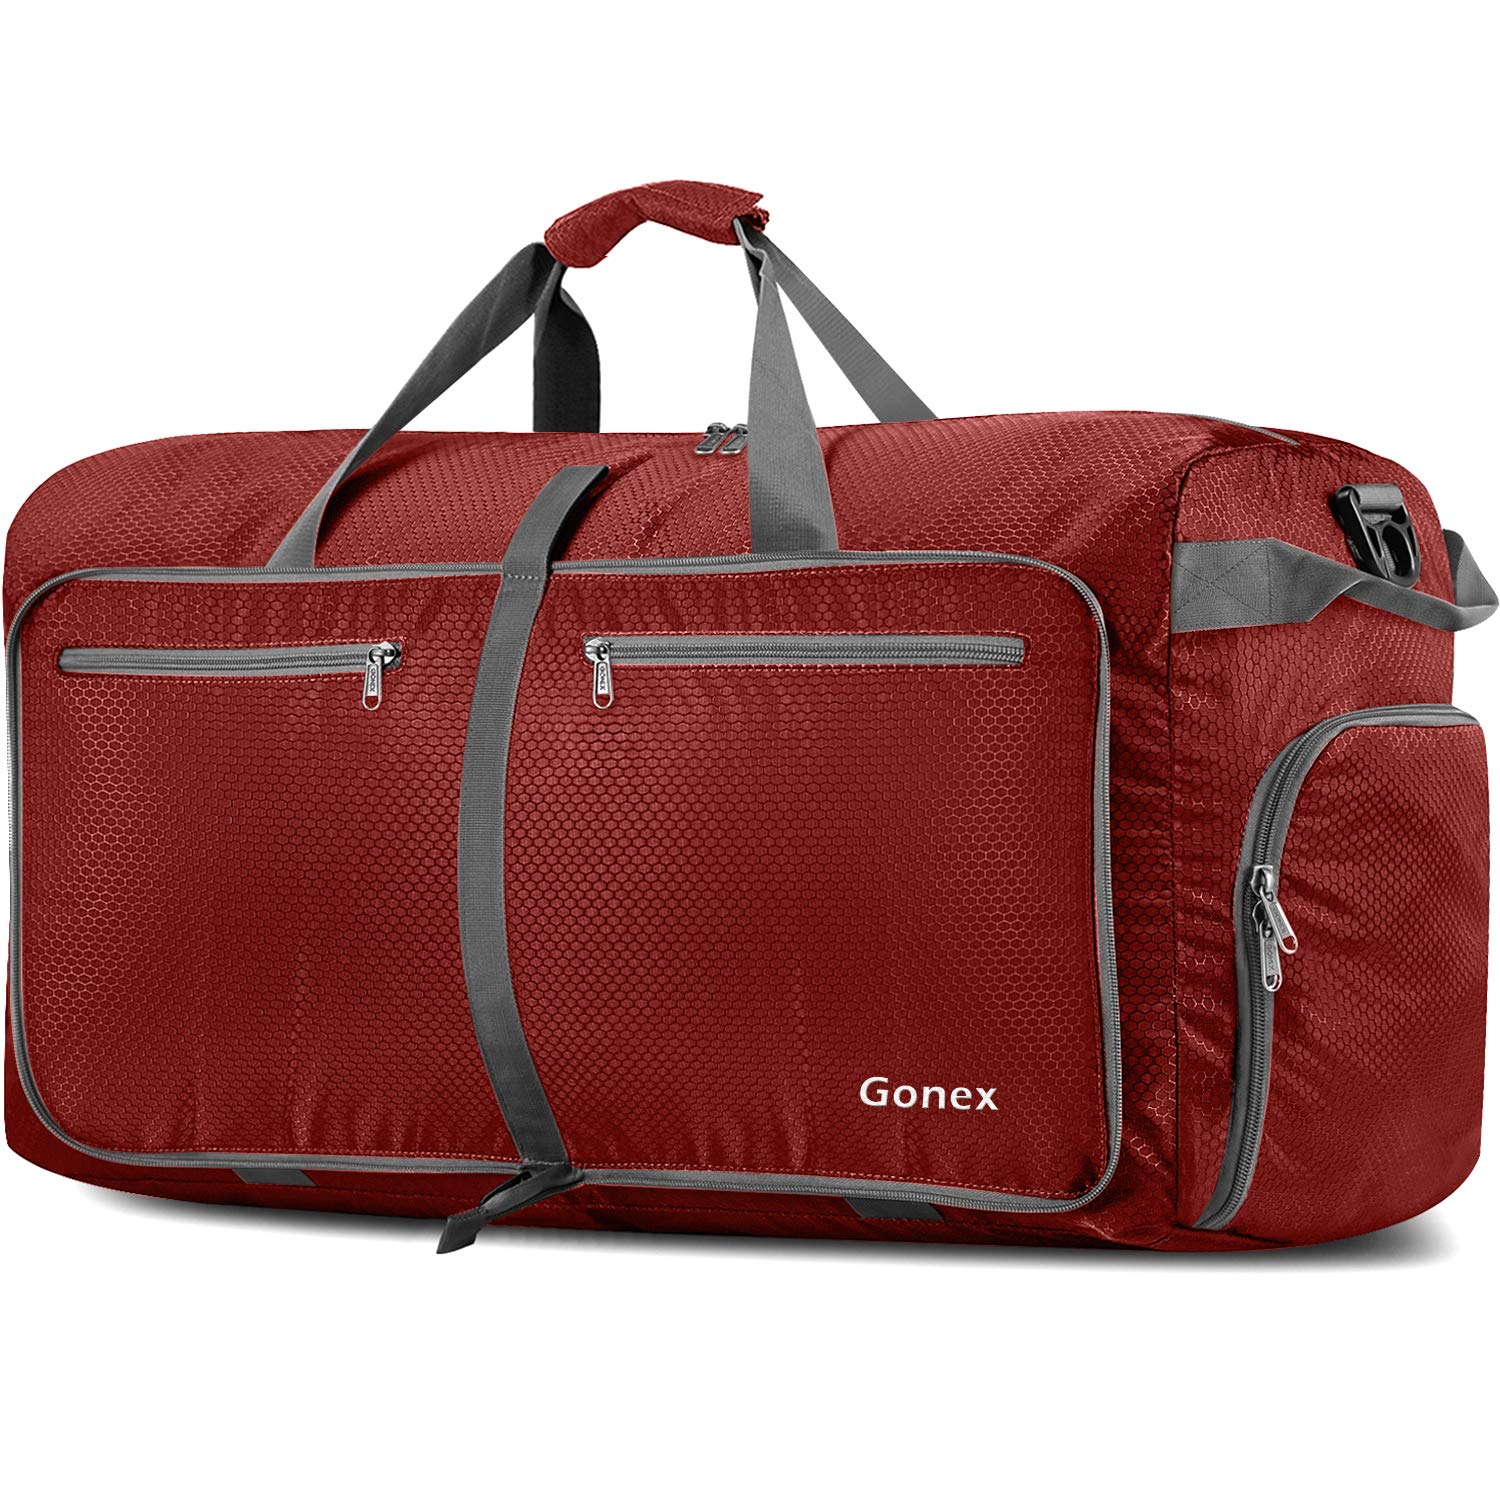 foldable duffle bag for traveling